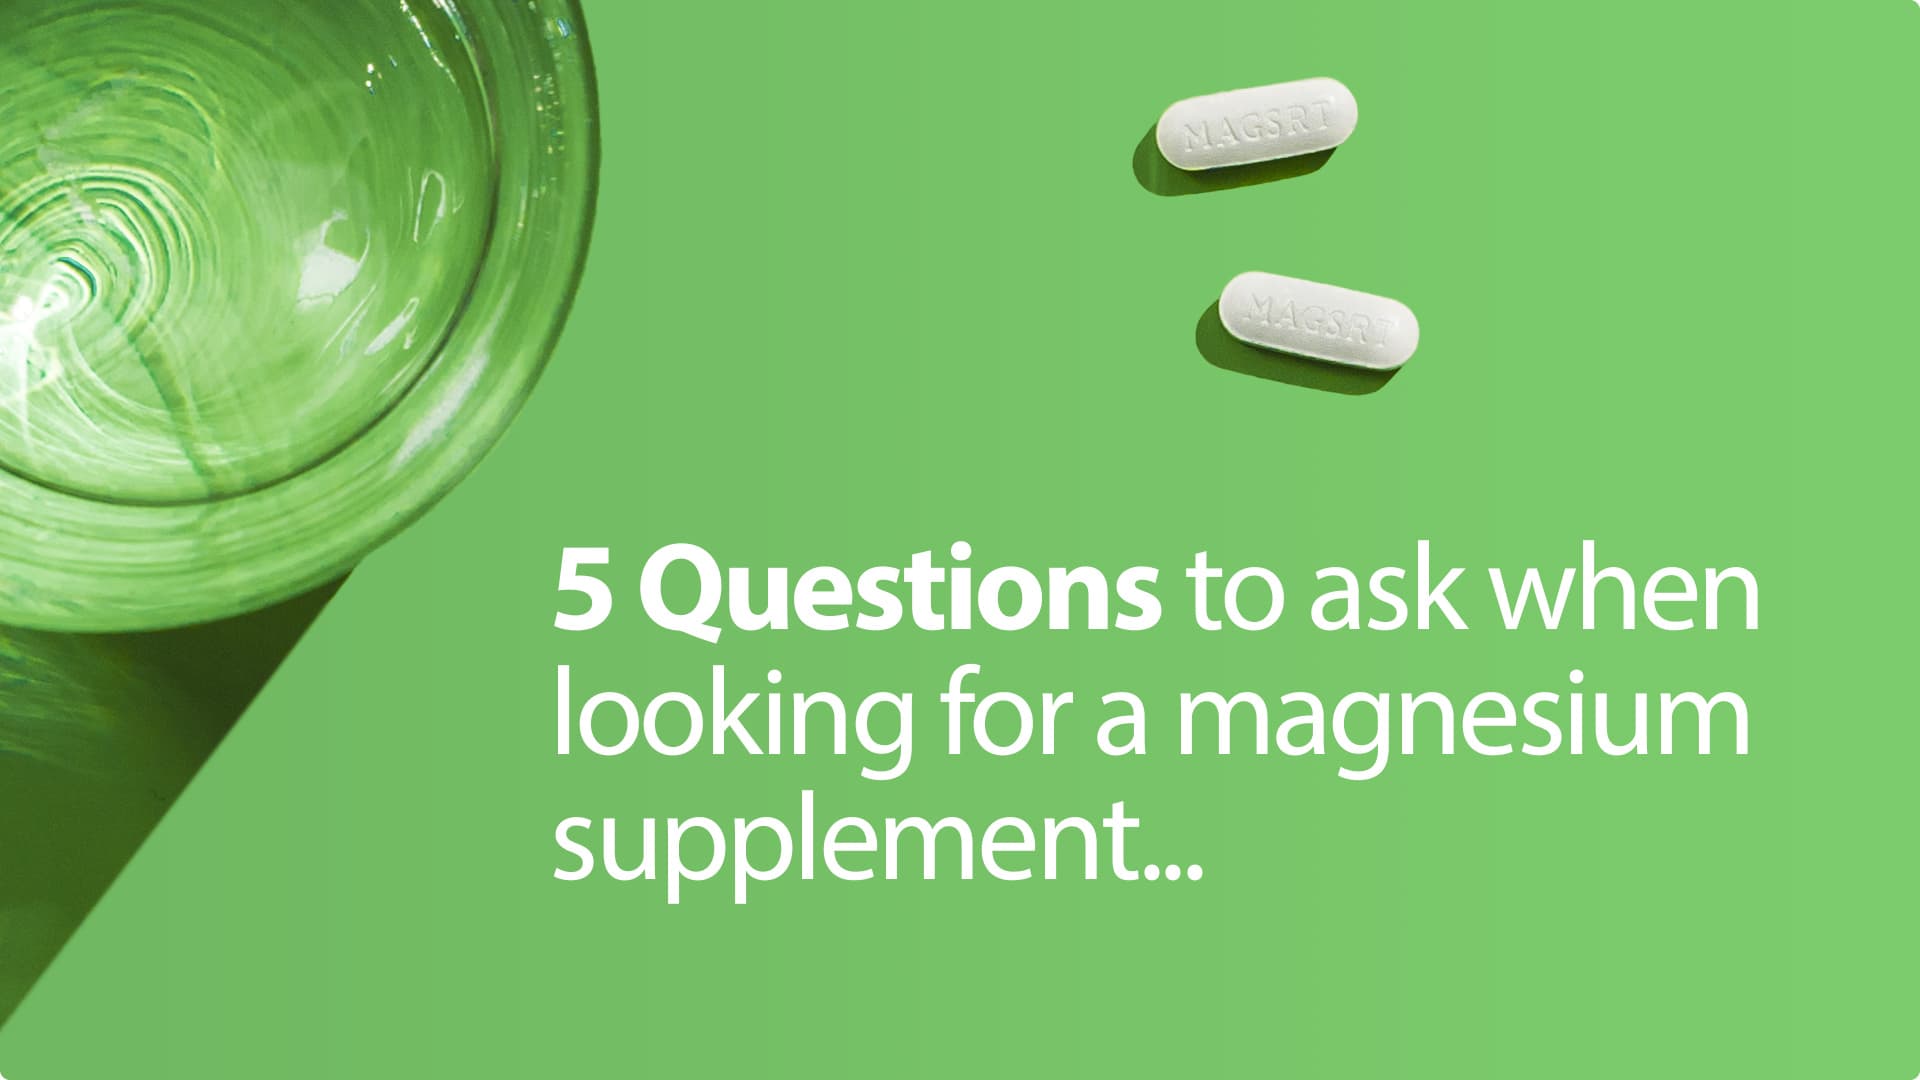 5 Questions to ask when looking for a Magnesium supplement...